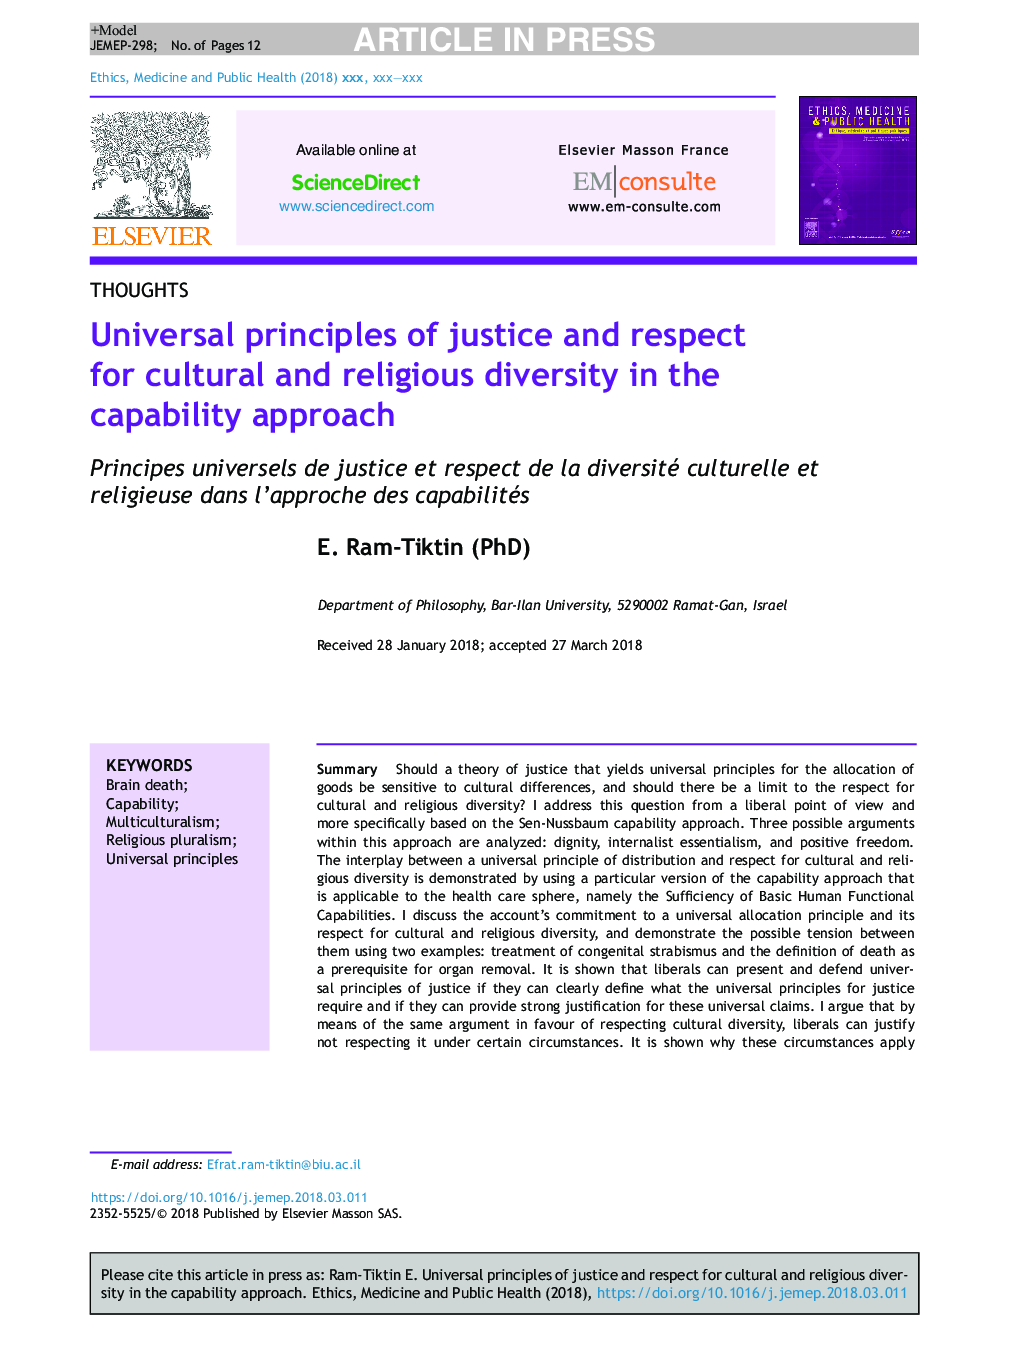 Universal principles of justice and respect for cultural and religious diversity in the capability approach